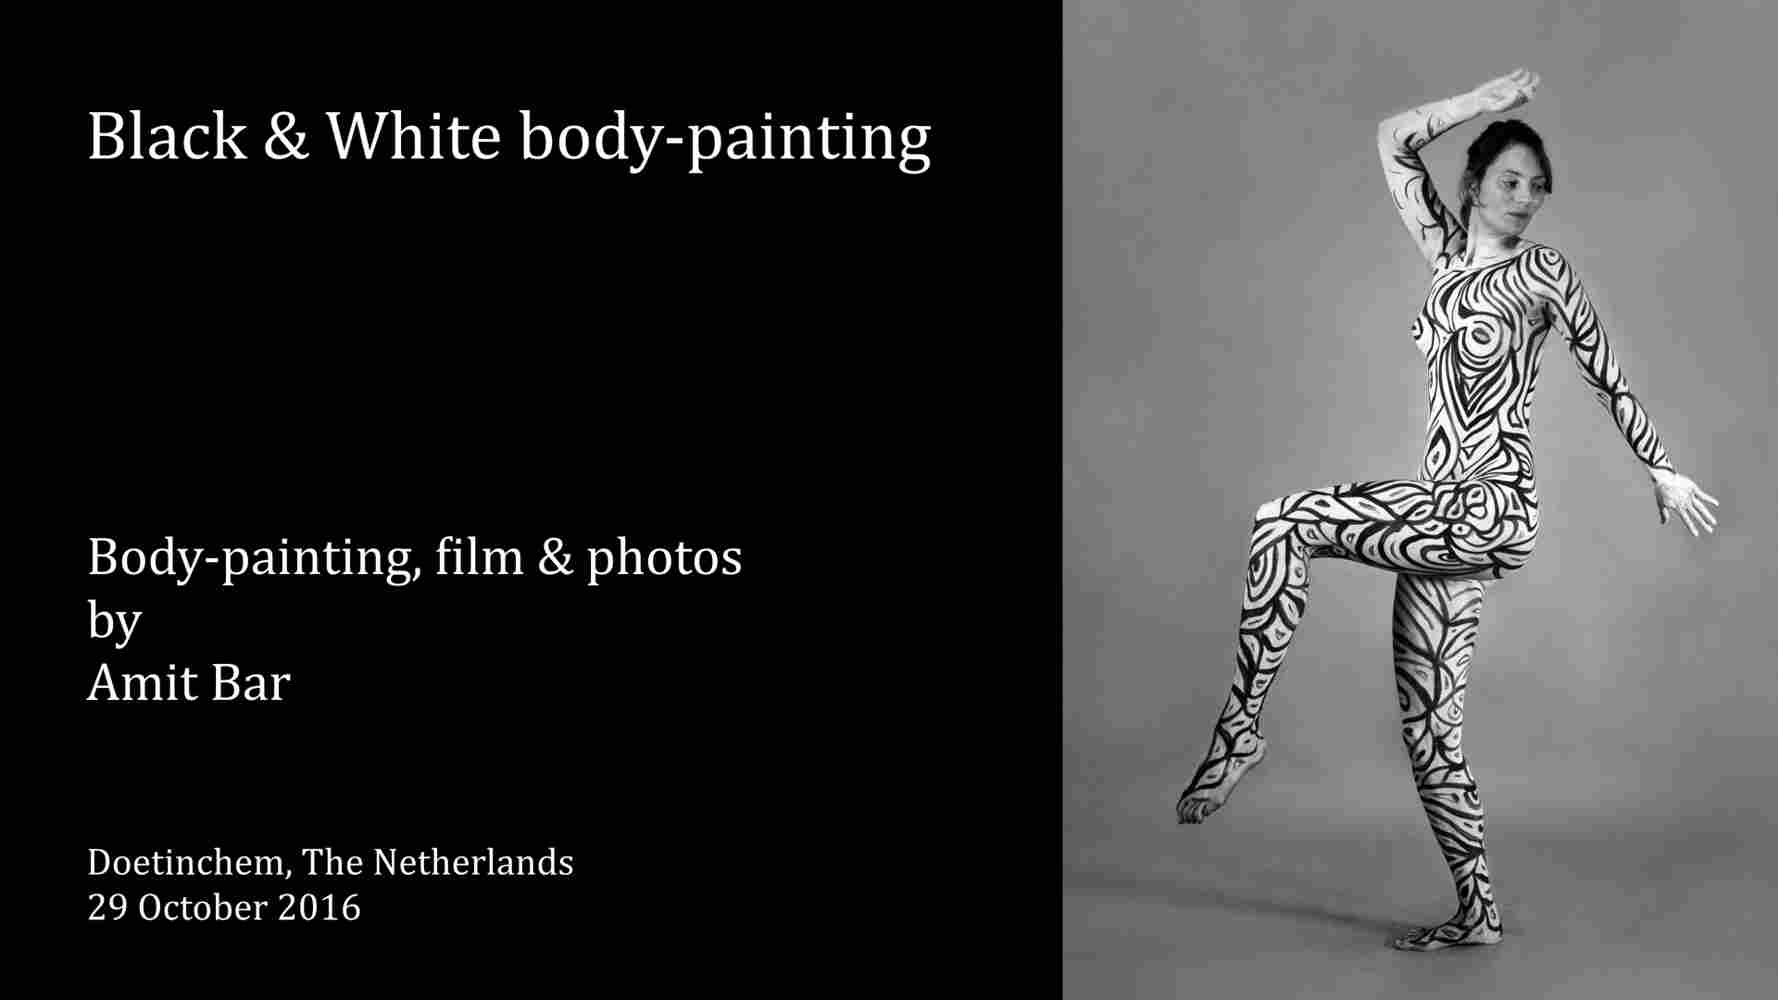 B&W video: Black & white are the only colours which have been used to creae this body-painting.